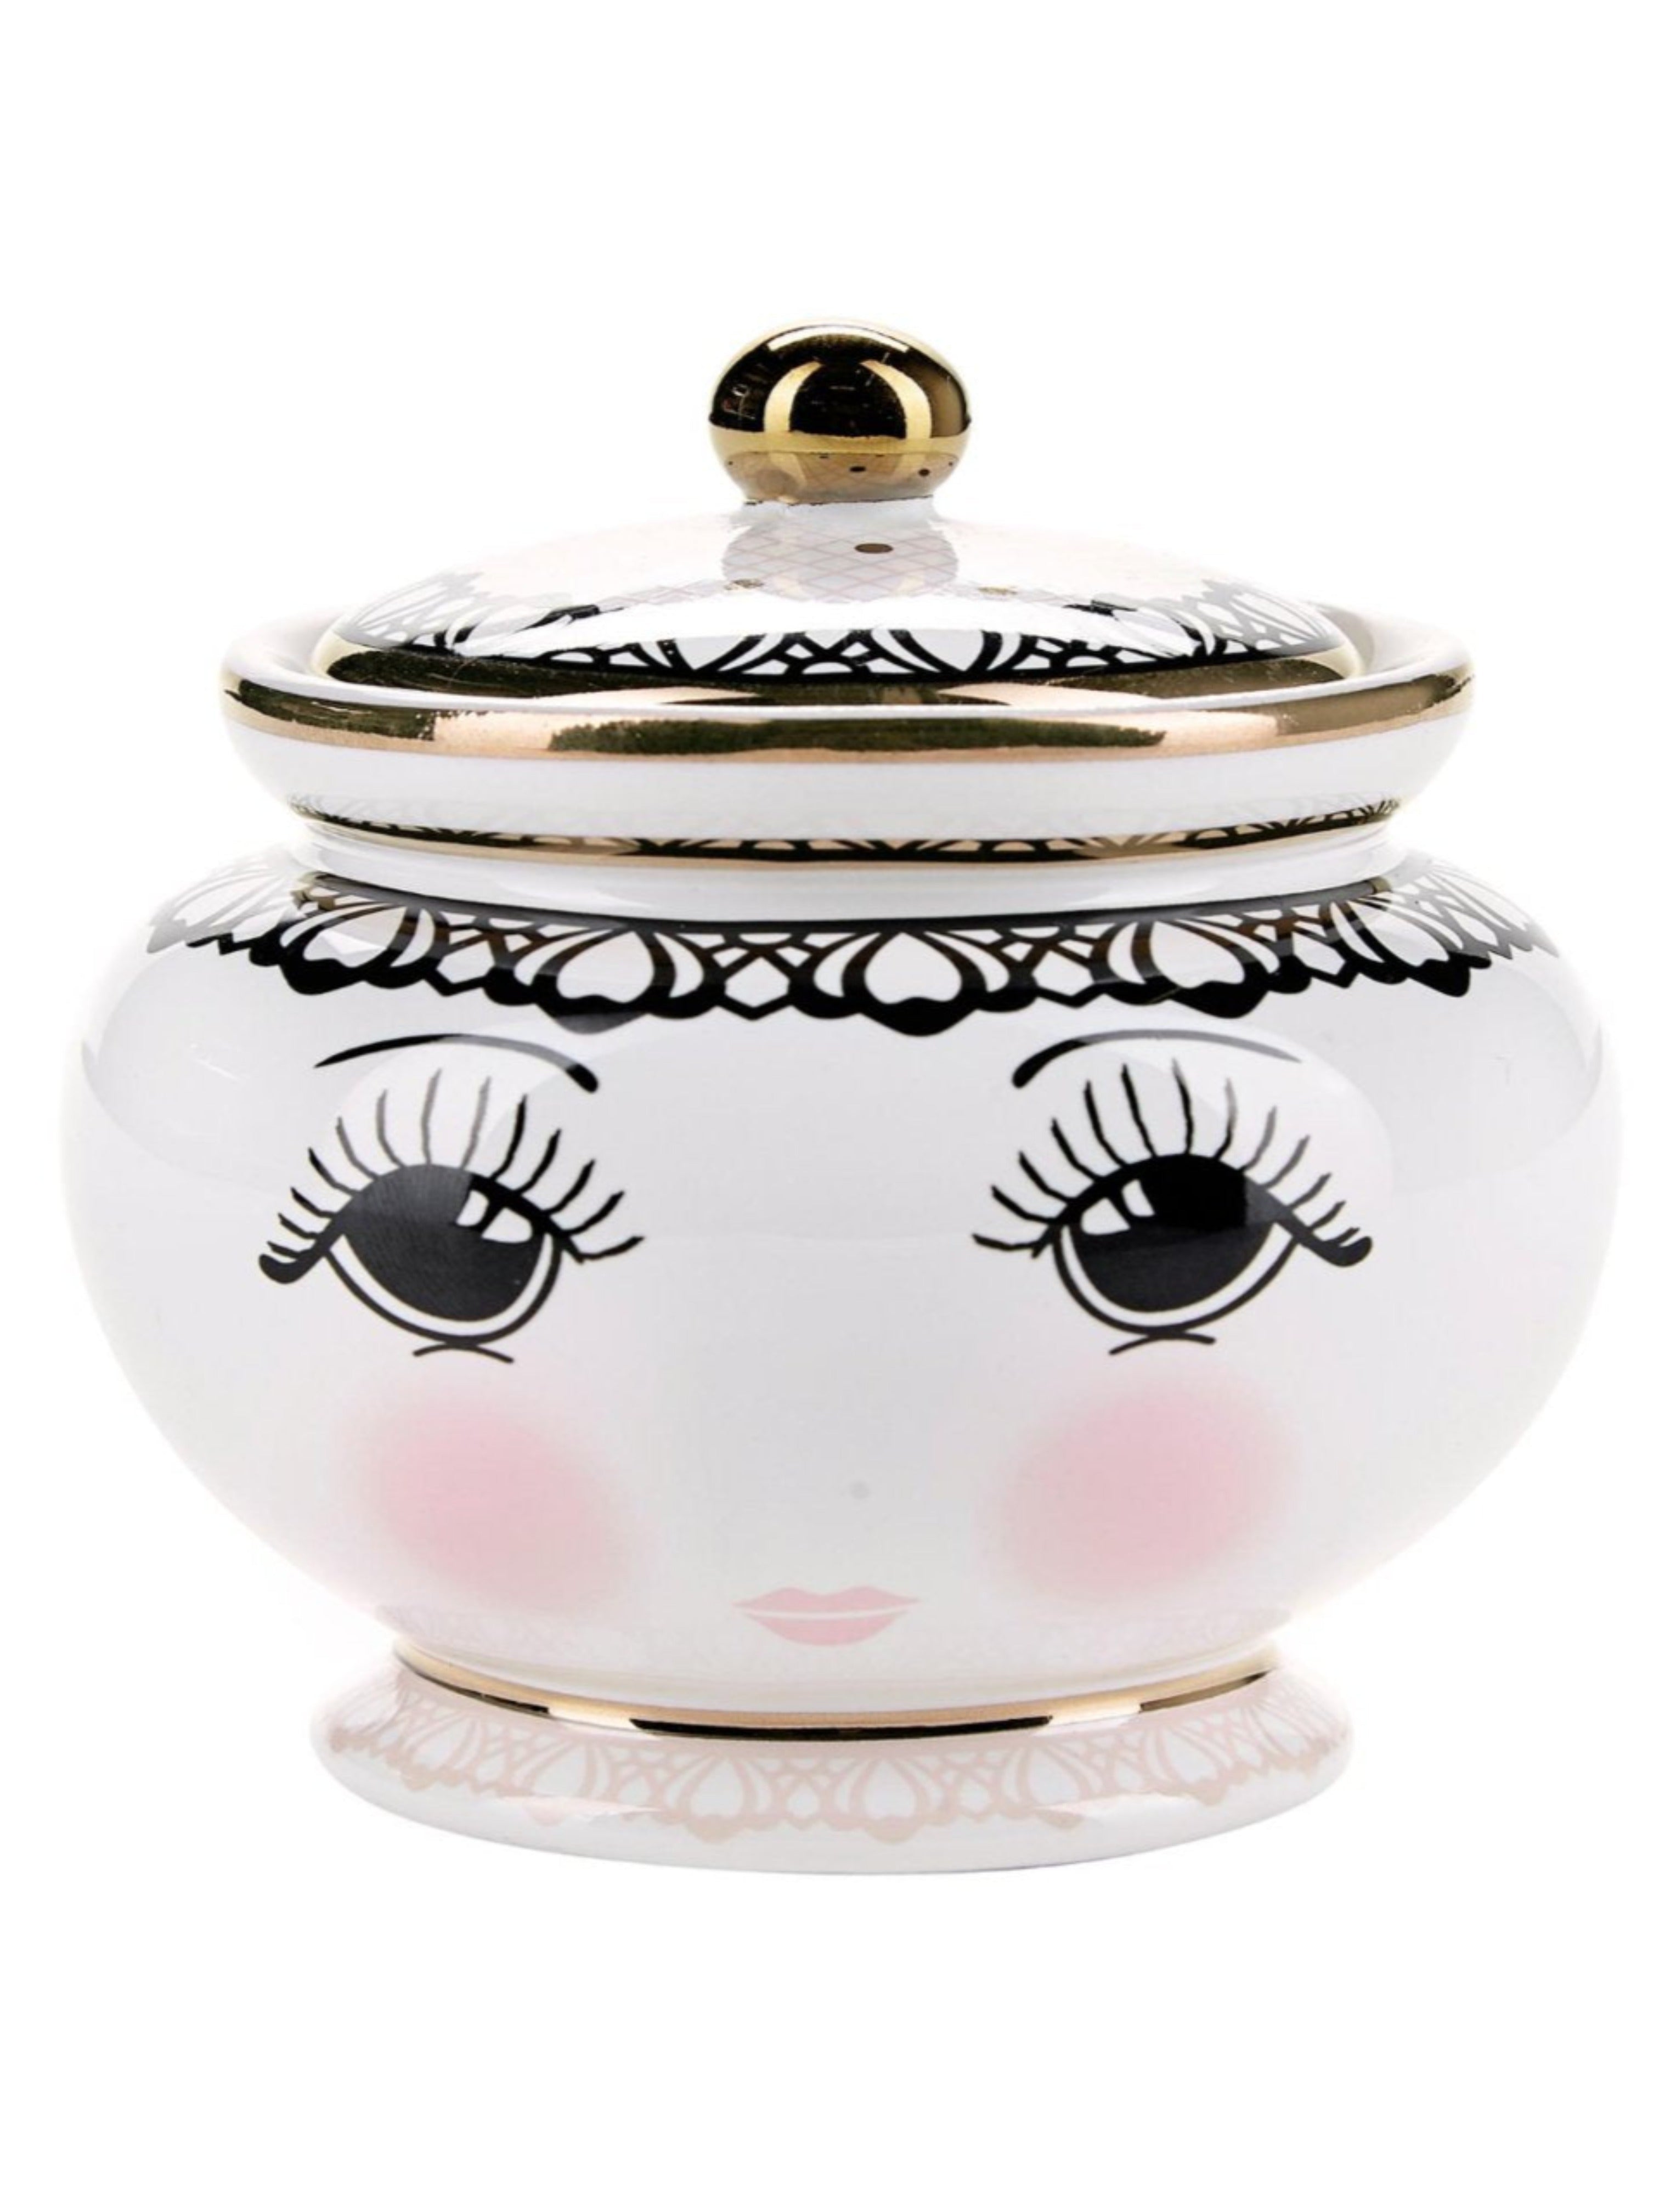 Miss Etoile Lidded Sugar Jar With Lace Design